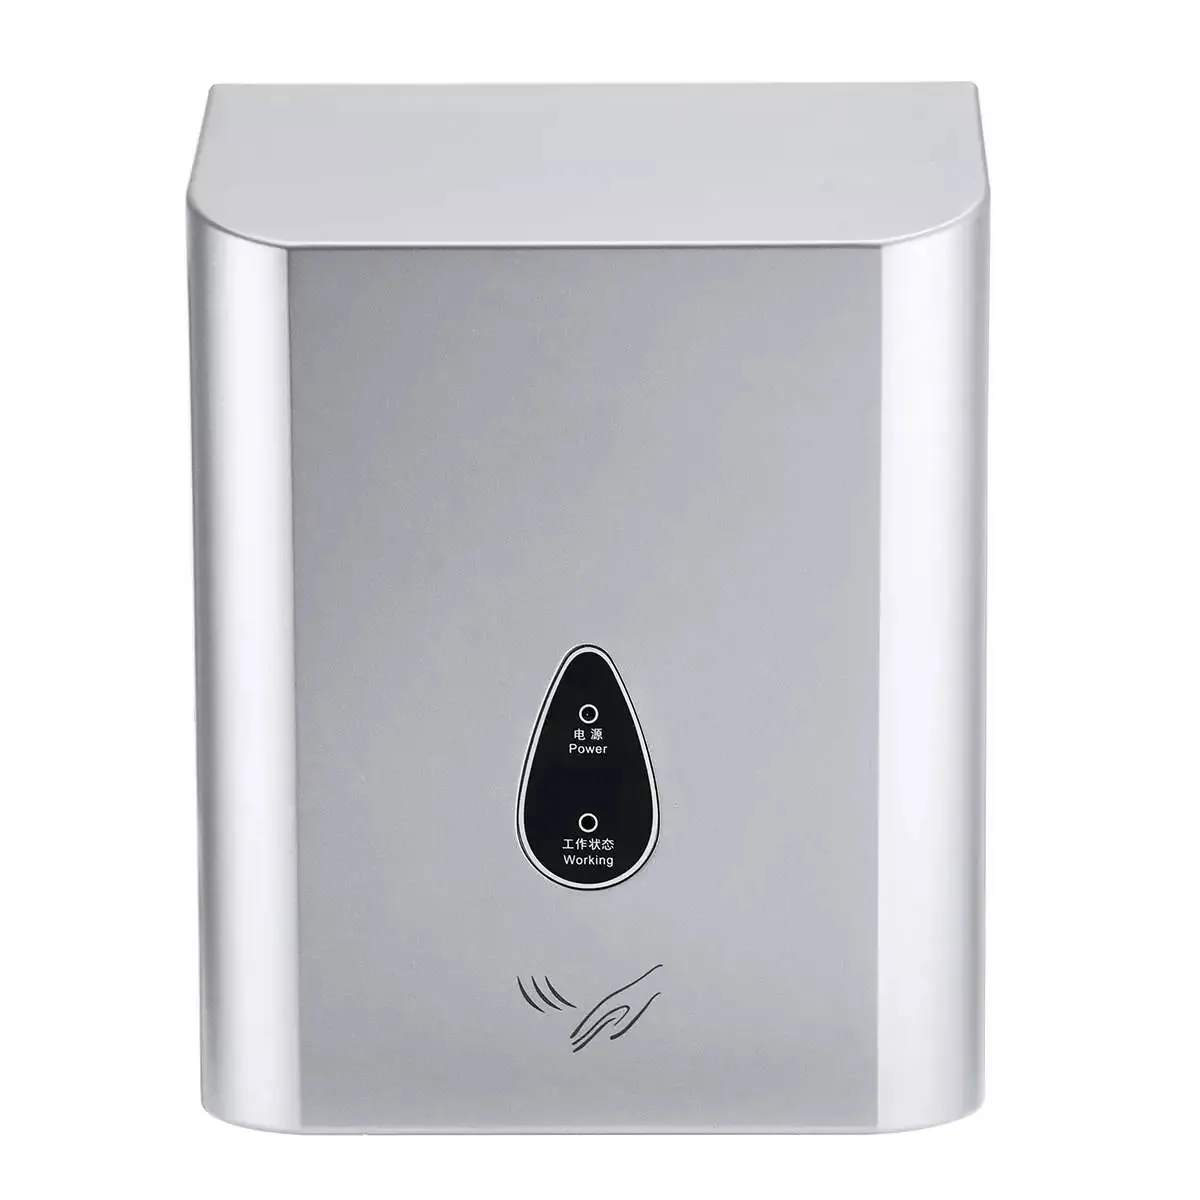 FreeShipping 2500W 220V High Speed Electric Hand Dryer Infrared Sensor Full Automatic Hand-drying Device Bathroom Hot Air Wind Blower